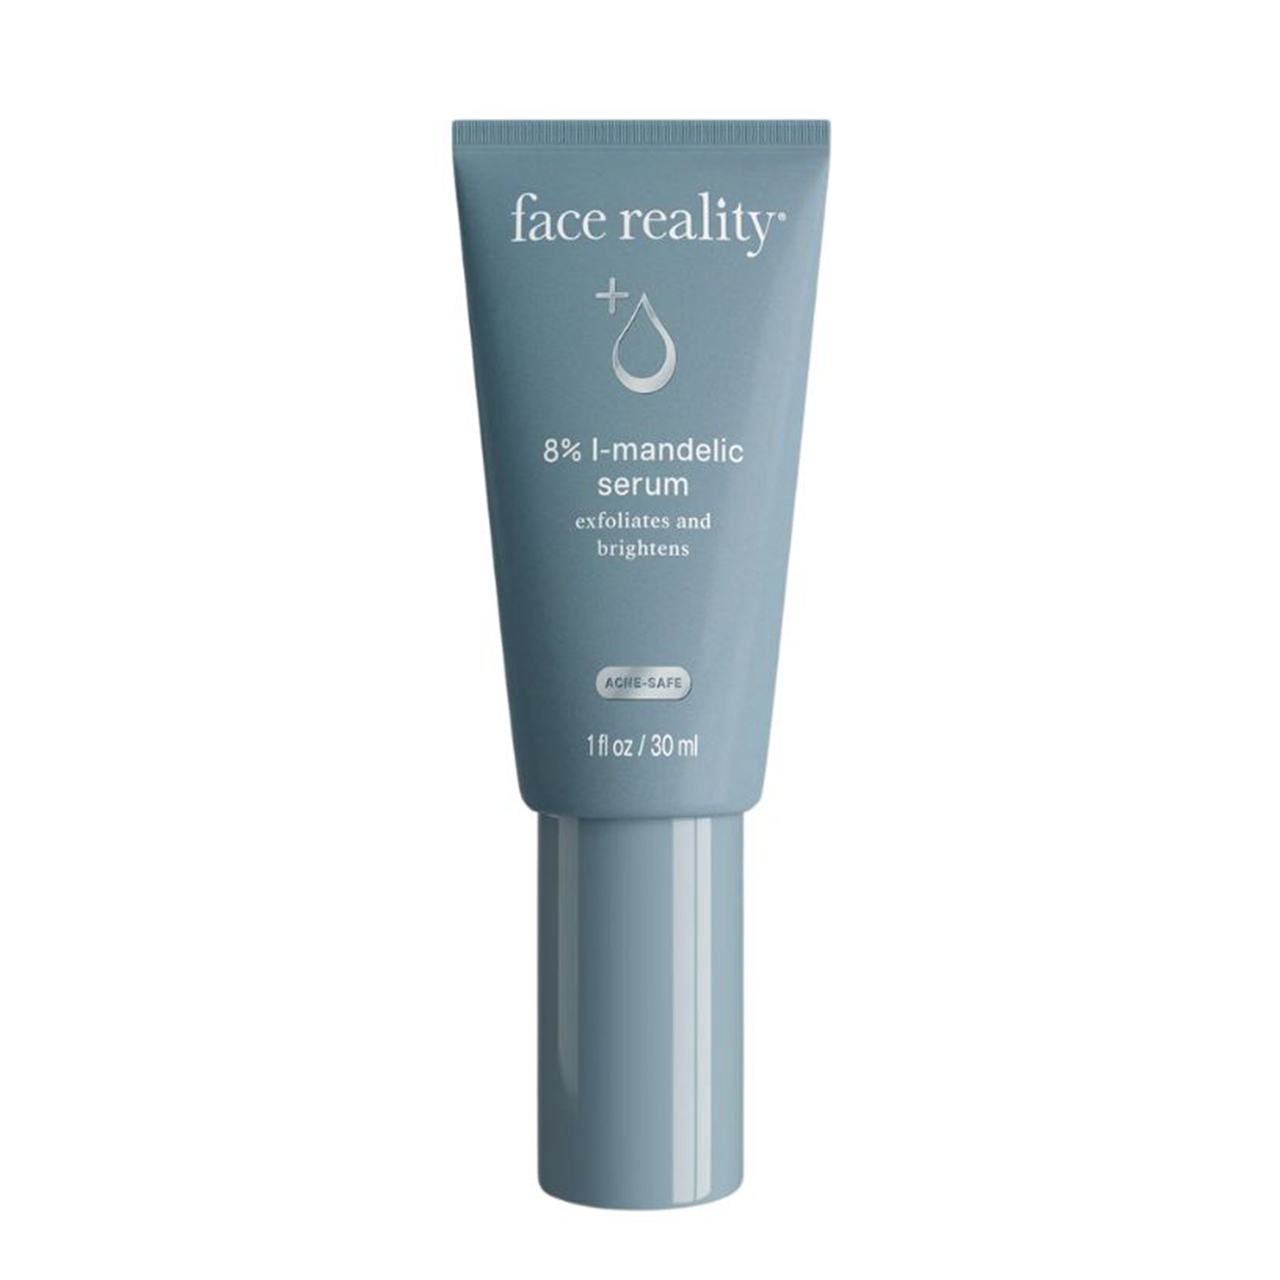 Face Reality 8% L-Mandelic Serum - 1oz (MS-2) (03080) Questions & Answers